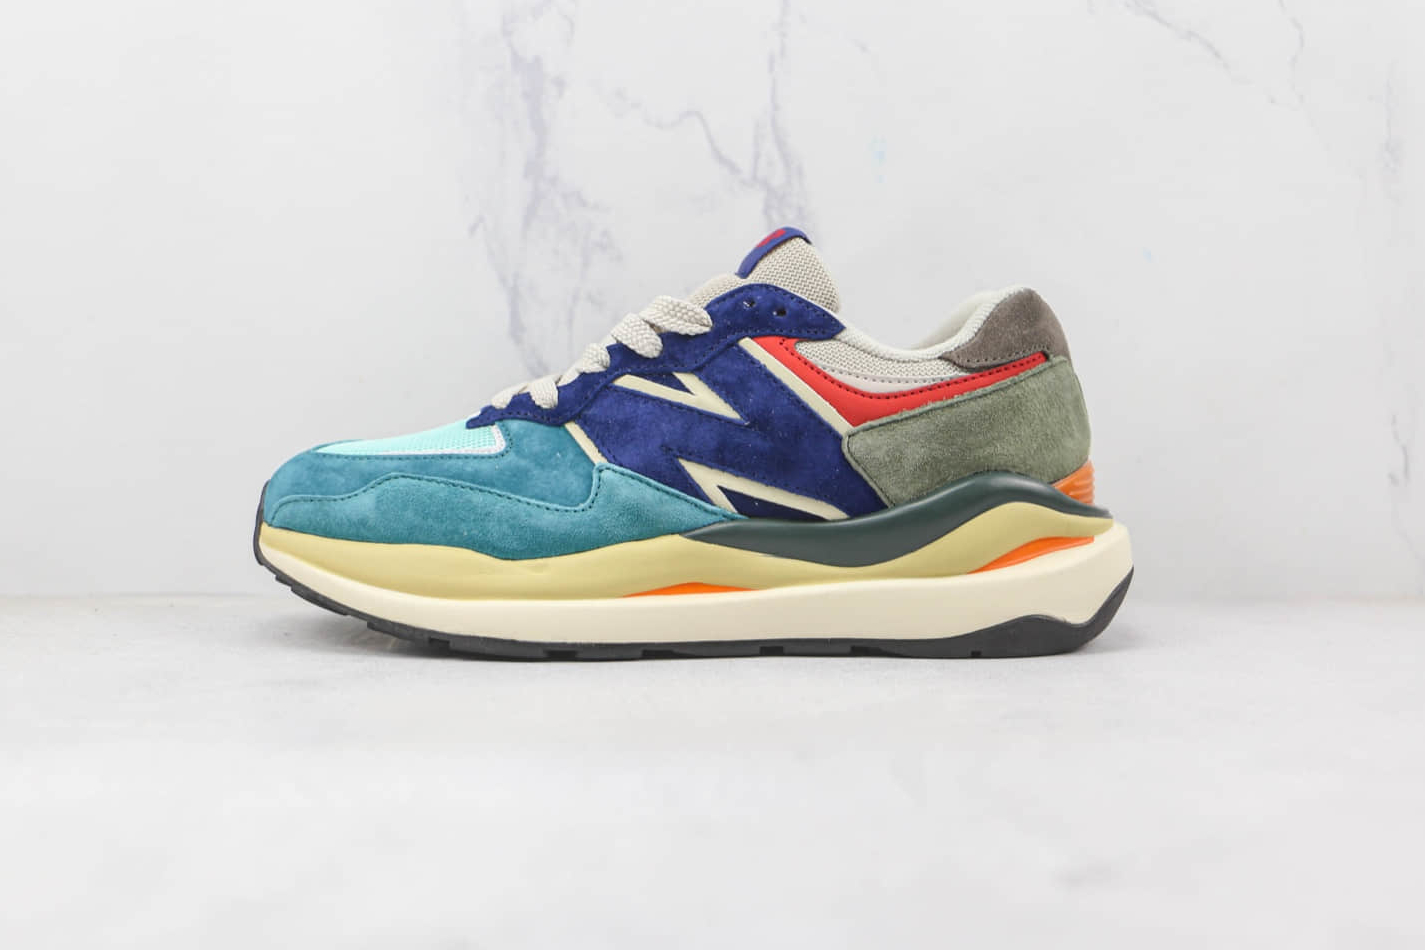 New Balance 5740FY1 Light Cliff Grey Multi Sneaker | Limited Edition